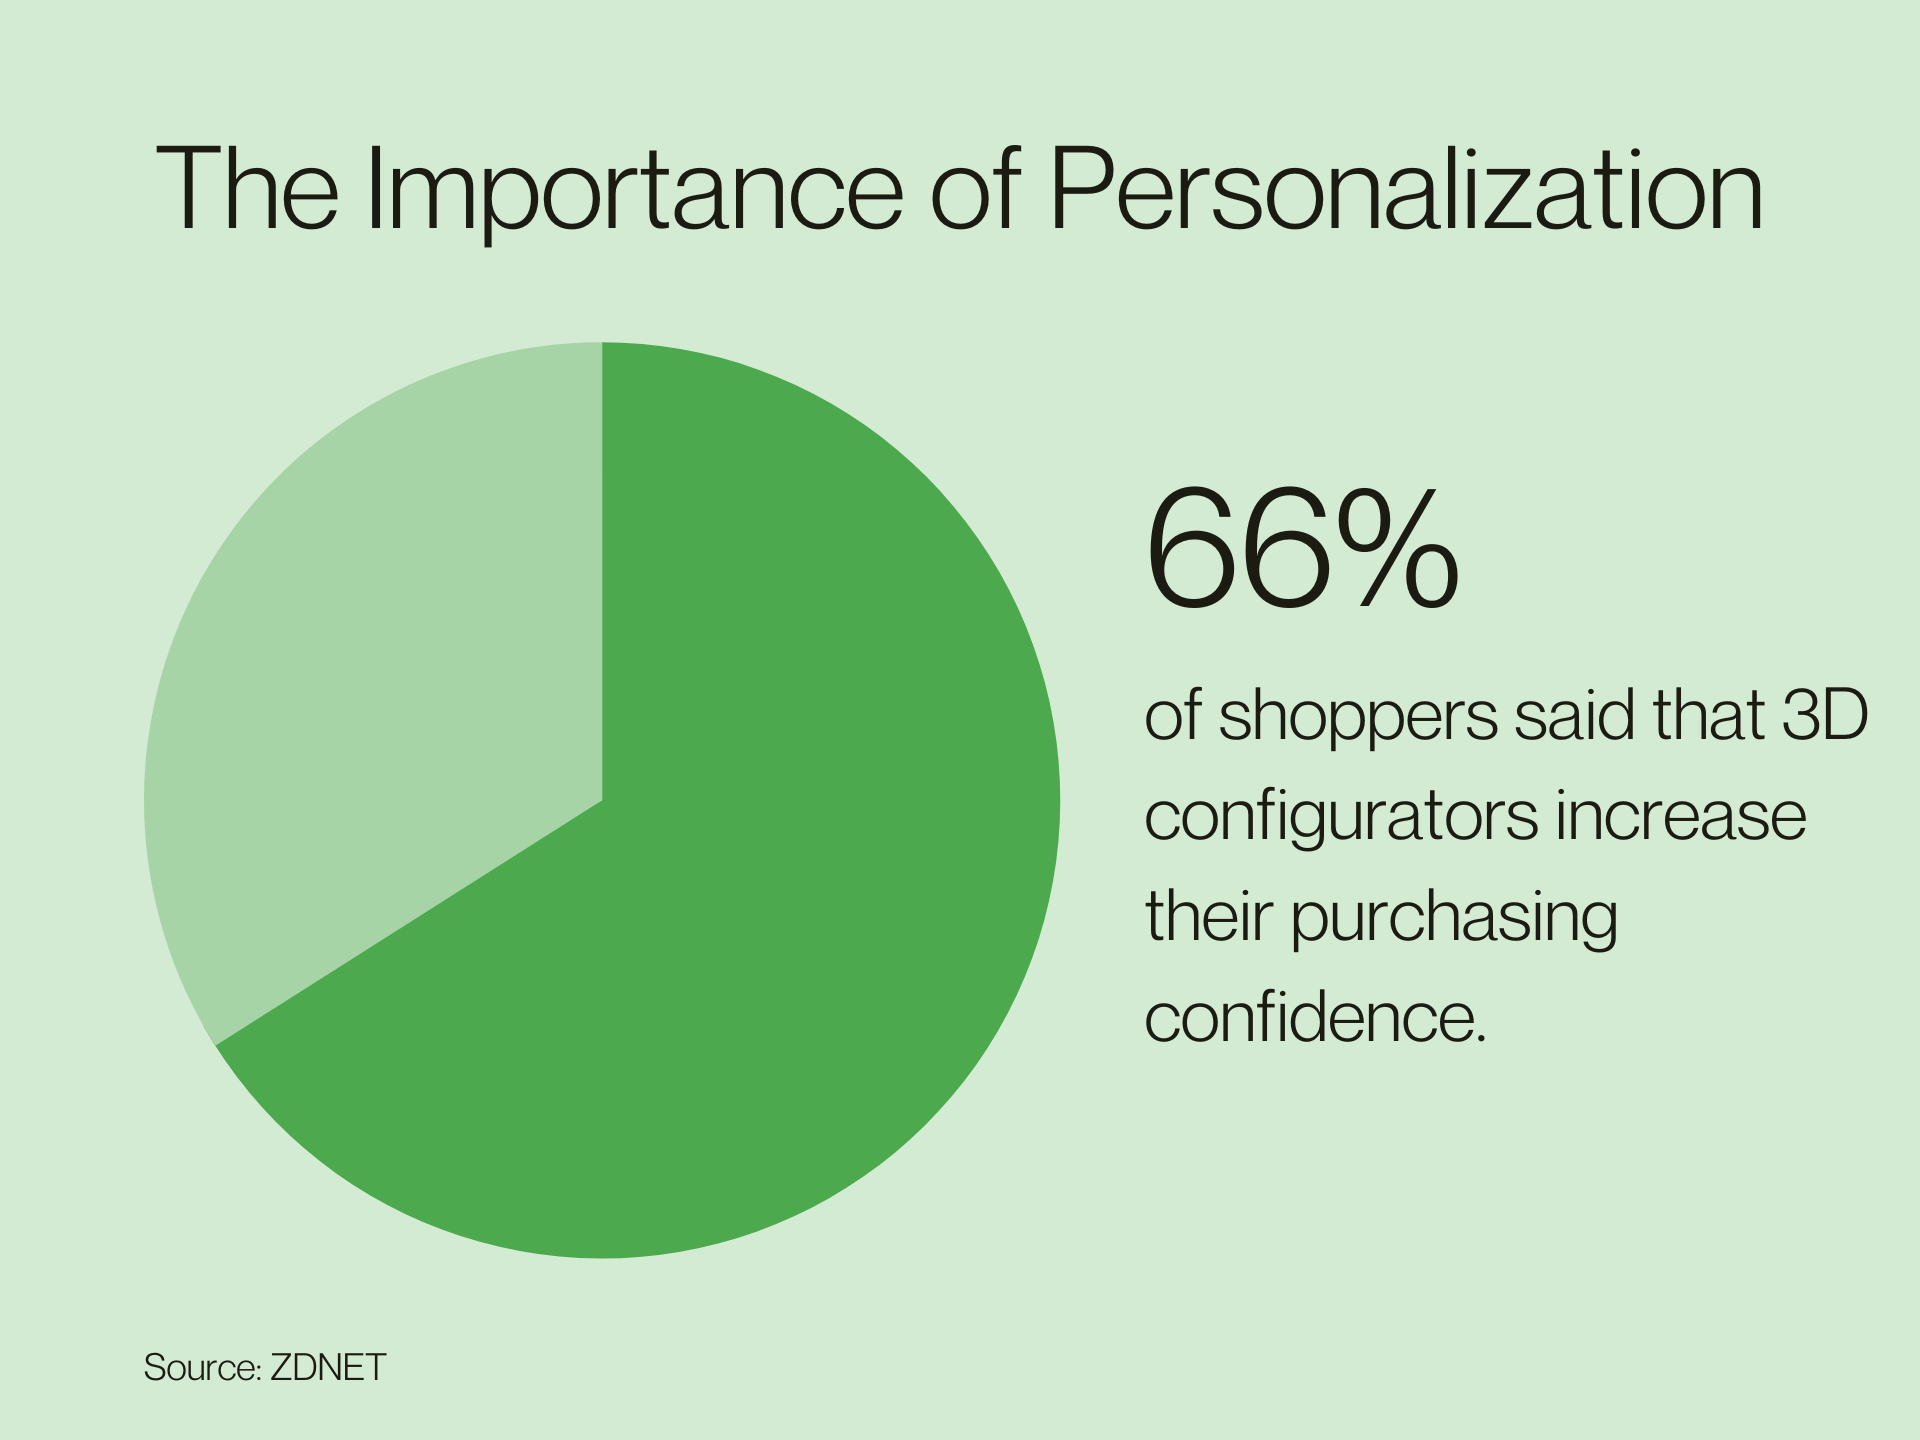 66 percent of shoppers said that 3D configurators increase their purchasing confidence